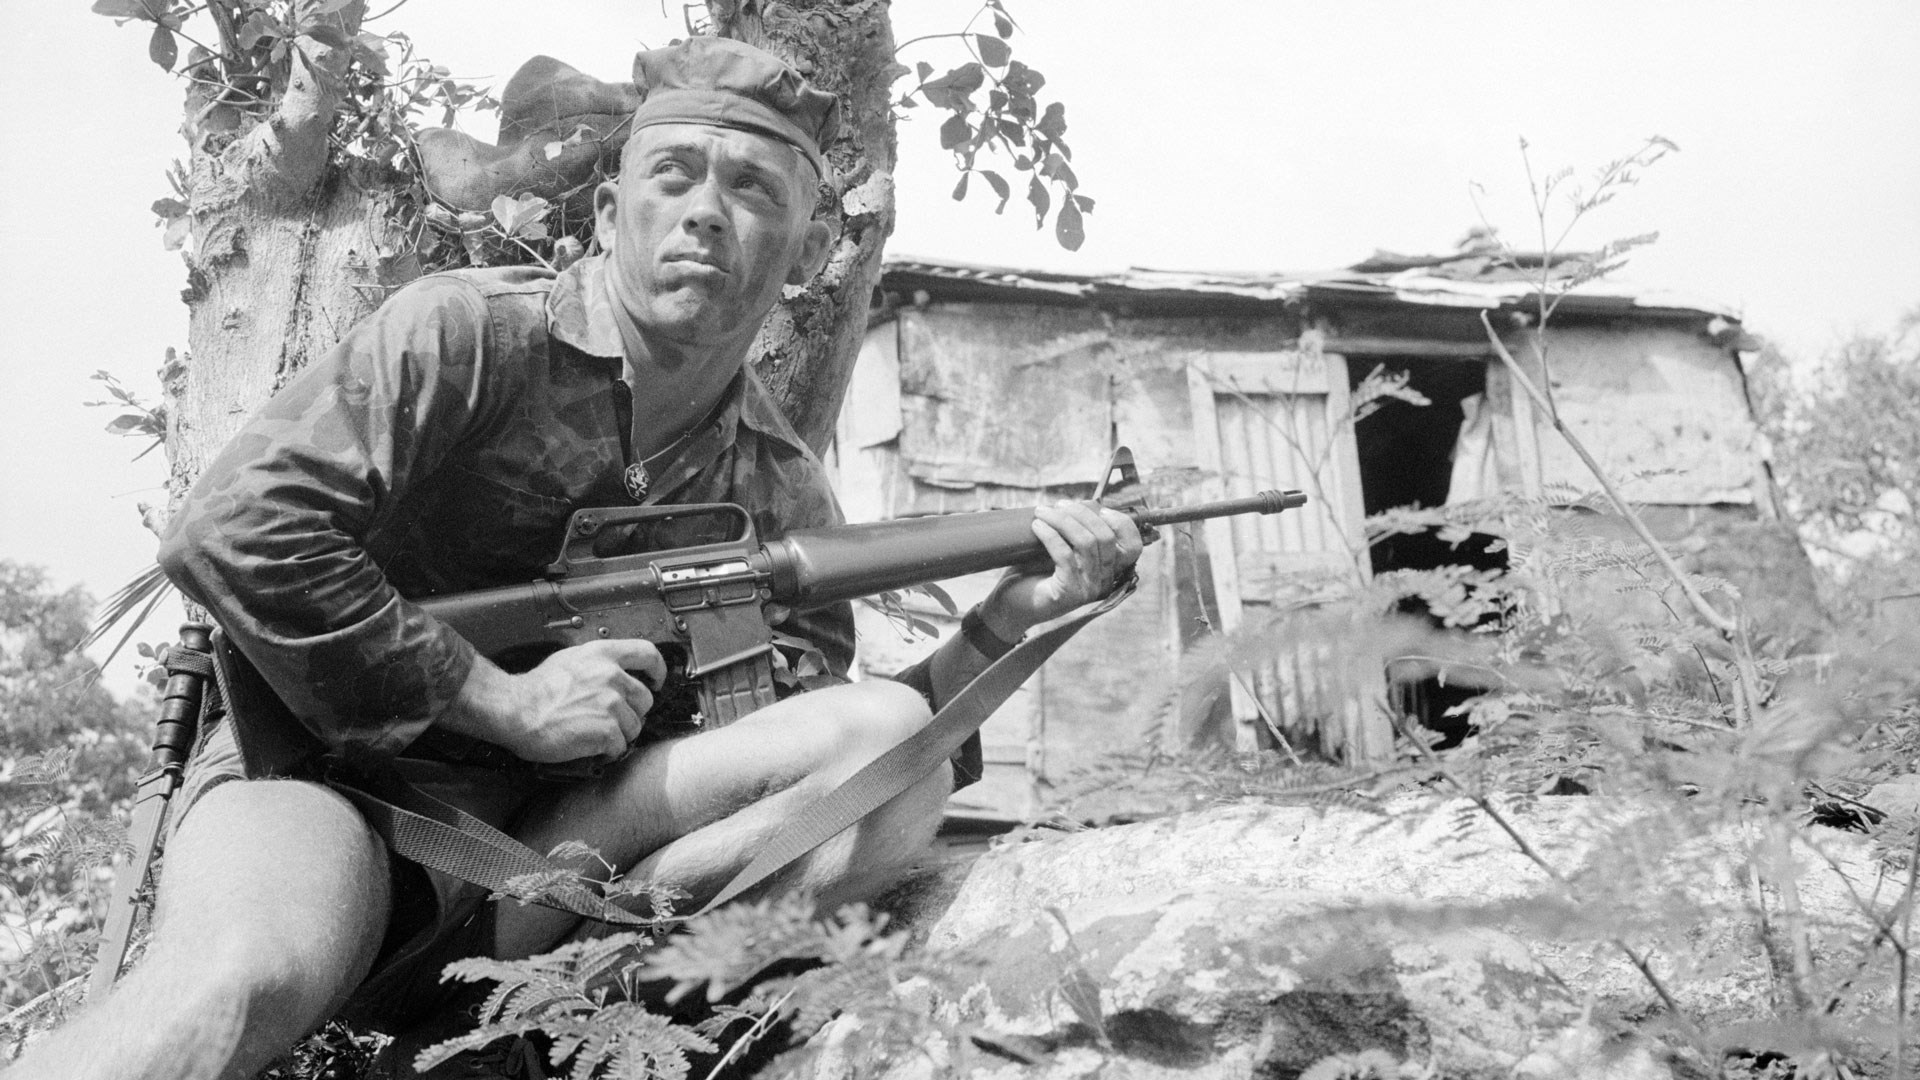 A U.S. Navy SEAL armed with a COLT/ArmaLite AR-15 Model 601 is seen here during a training exercise on St. Thomas, U.S. Virgin Islands on February 21, 1963. Photo by Marion S. Trikosko/US News and World Report Collection/PhotoQuest/Getty Images